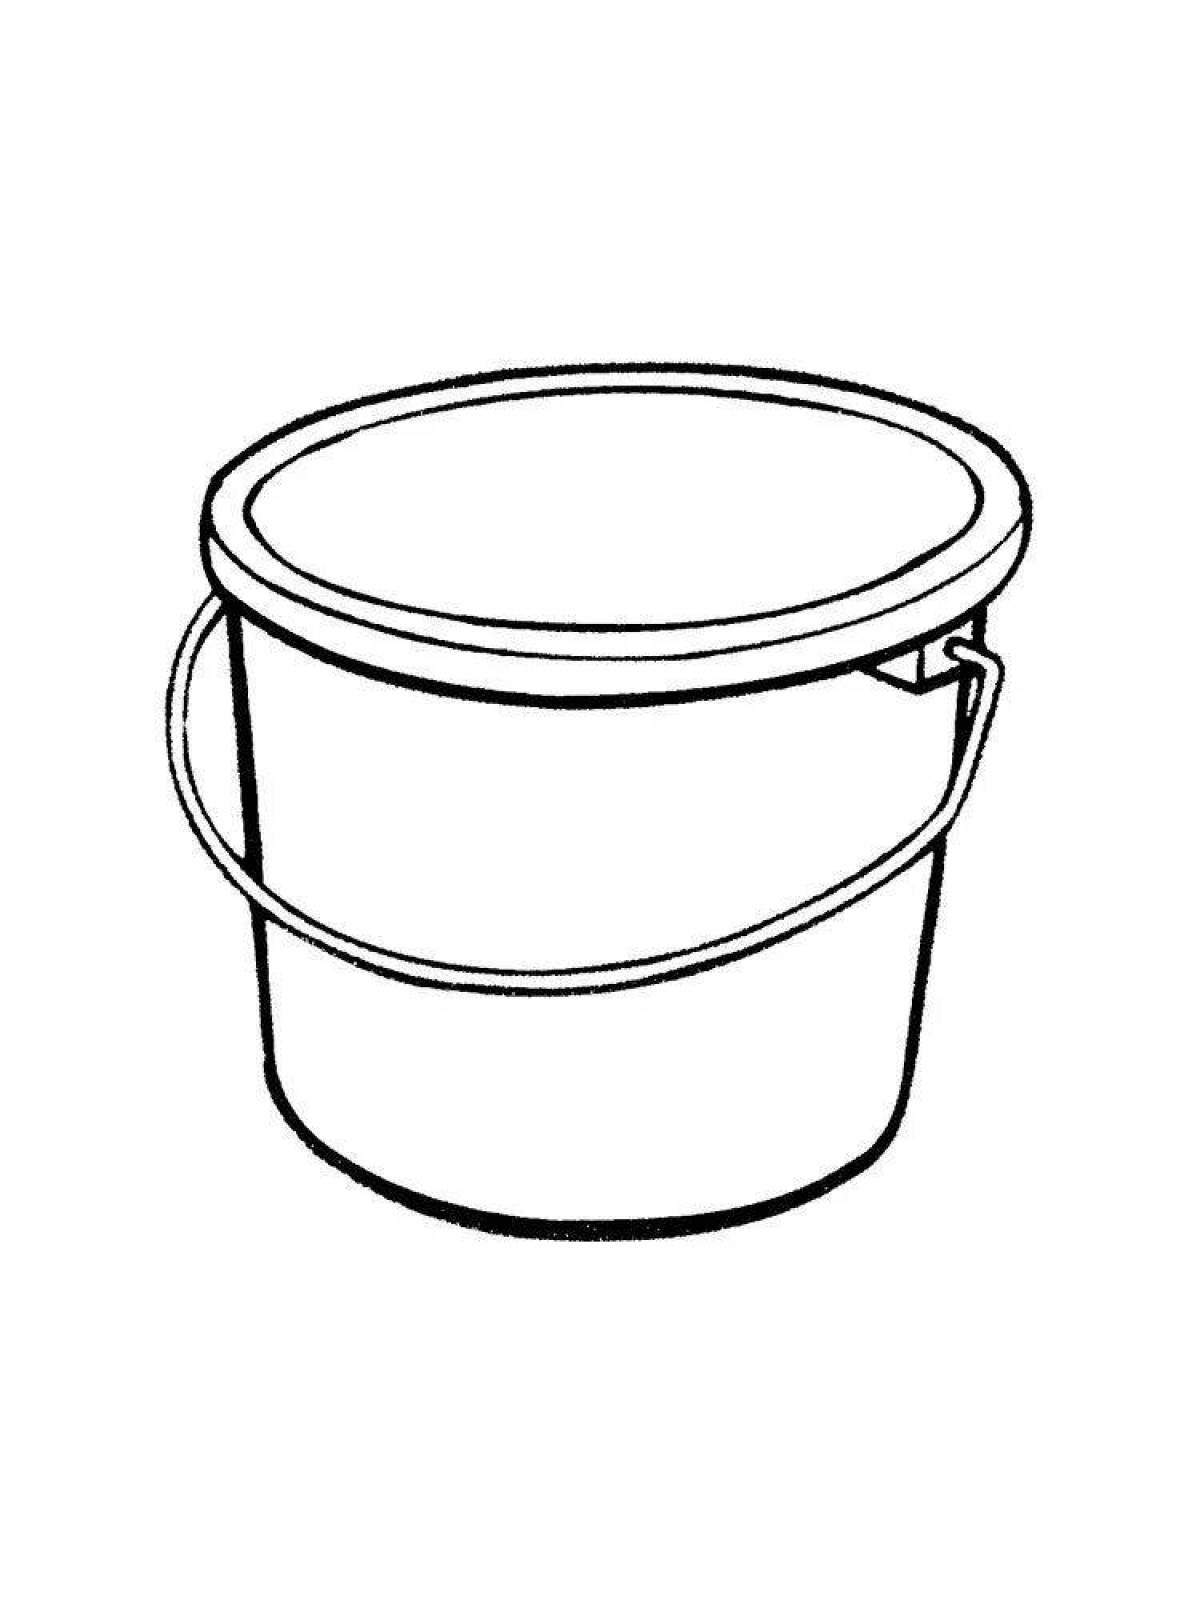 Playful baby bucket coloring page